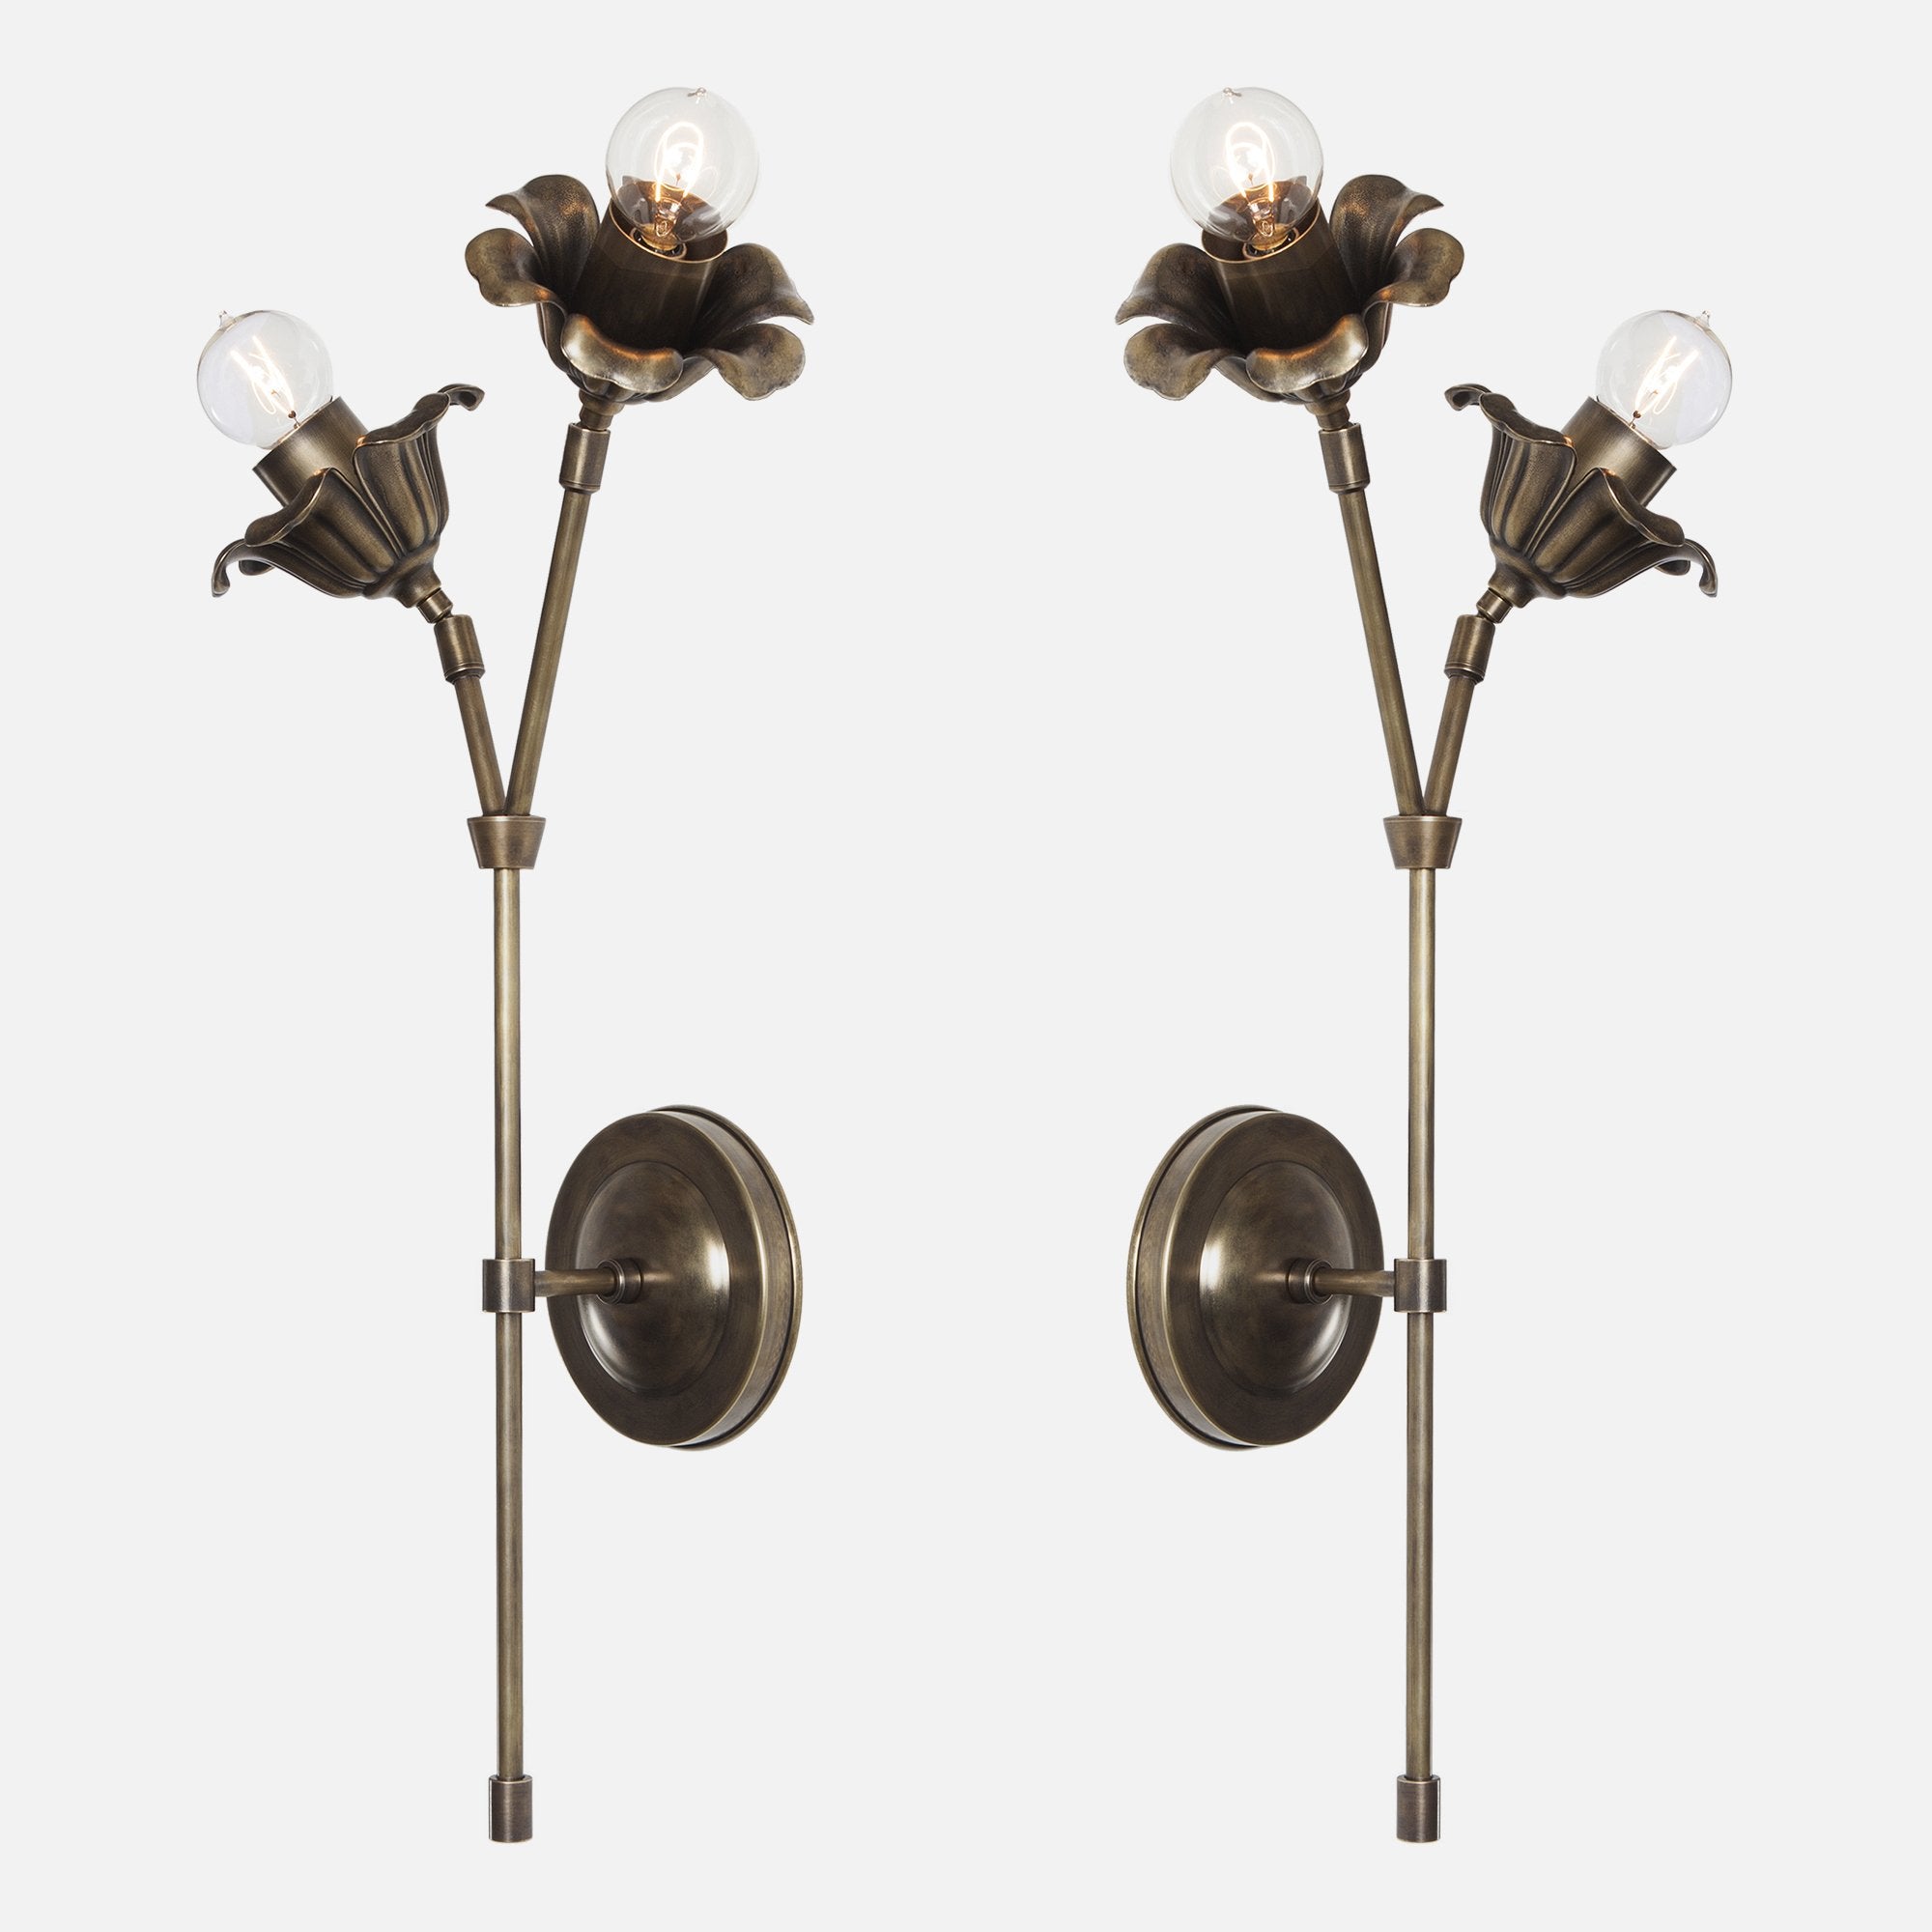 Bloom Wall Sconce Double Stem Mirrored Pair